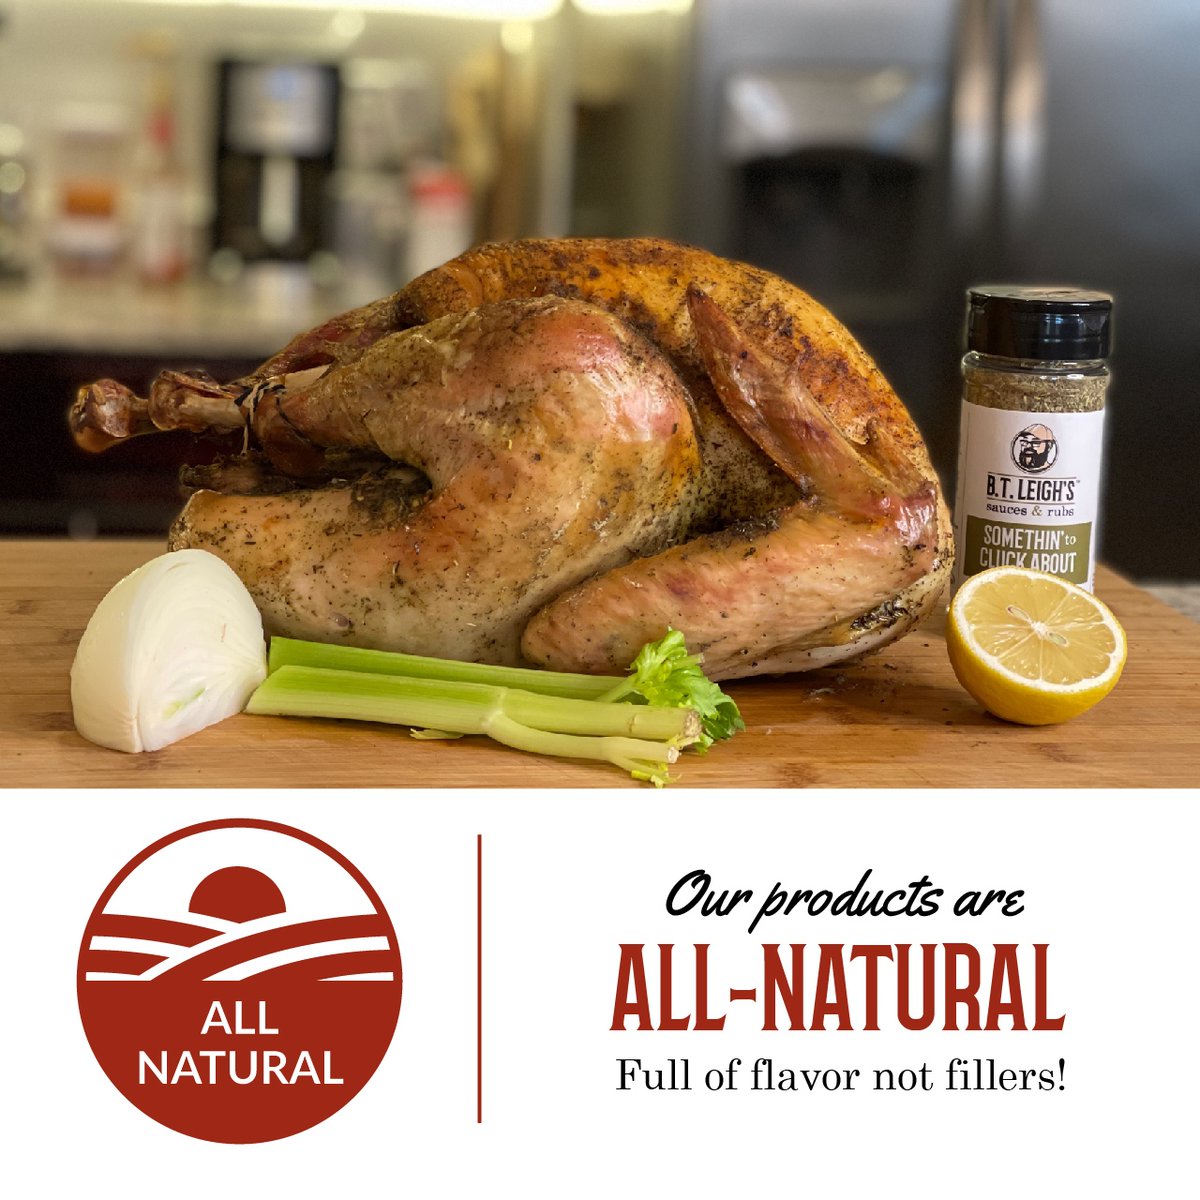 We take a lot of pride in putting quality products on your table with flavors that you can feel good about feeding your loved ones any day of the week. #btleighs #allnatural #sauces #rubs #spiceblends #spices #gourmet #af #feelgood #flavorunrestrained

btleighs.com